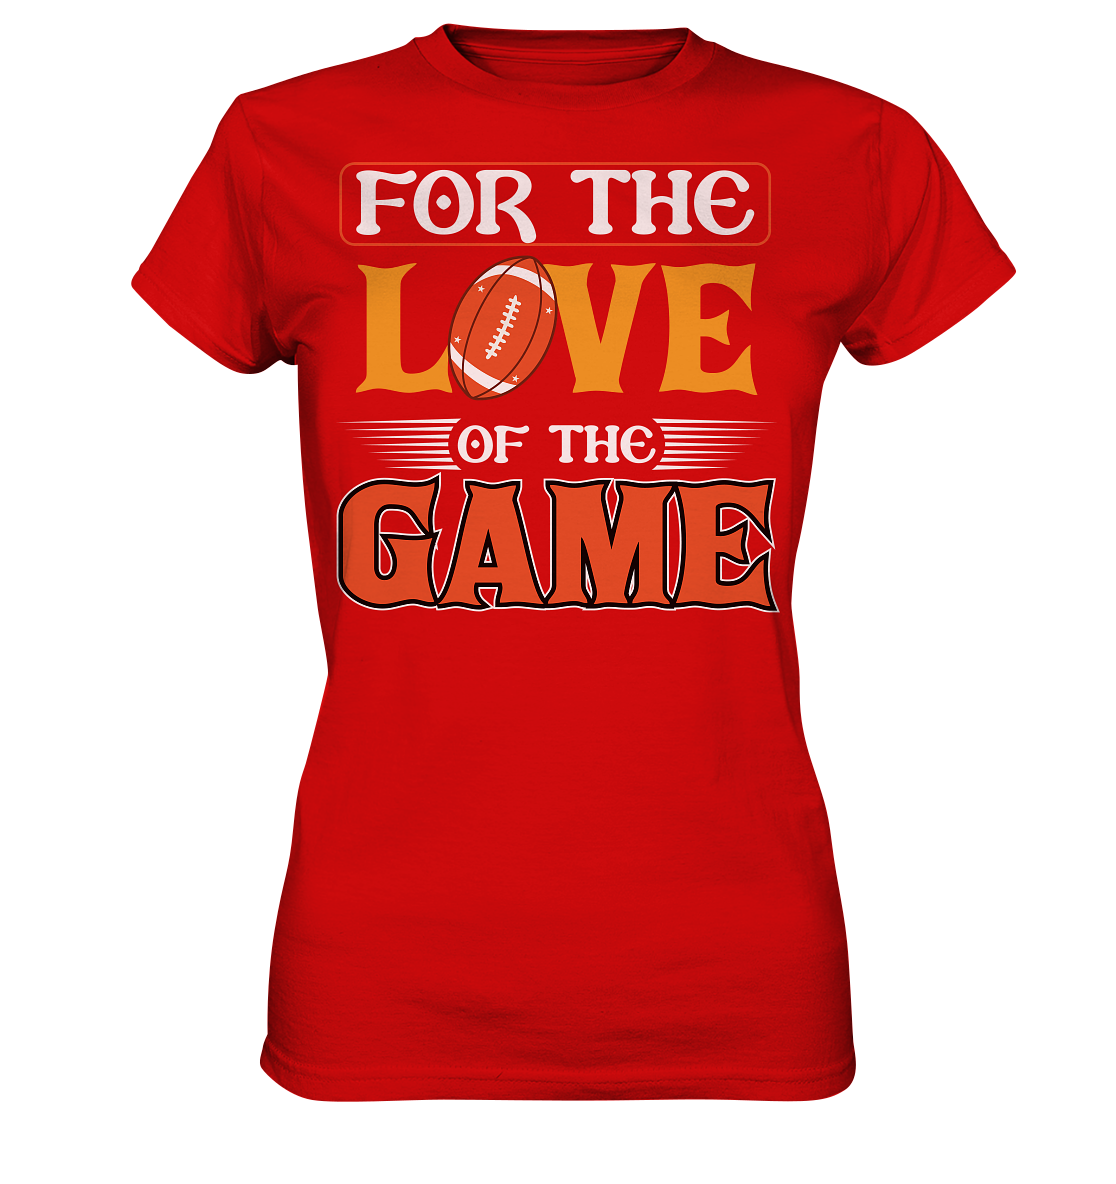 For the Love of the Game - Ladies Premium Shirt - Football Unity Football Unity